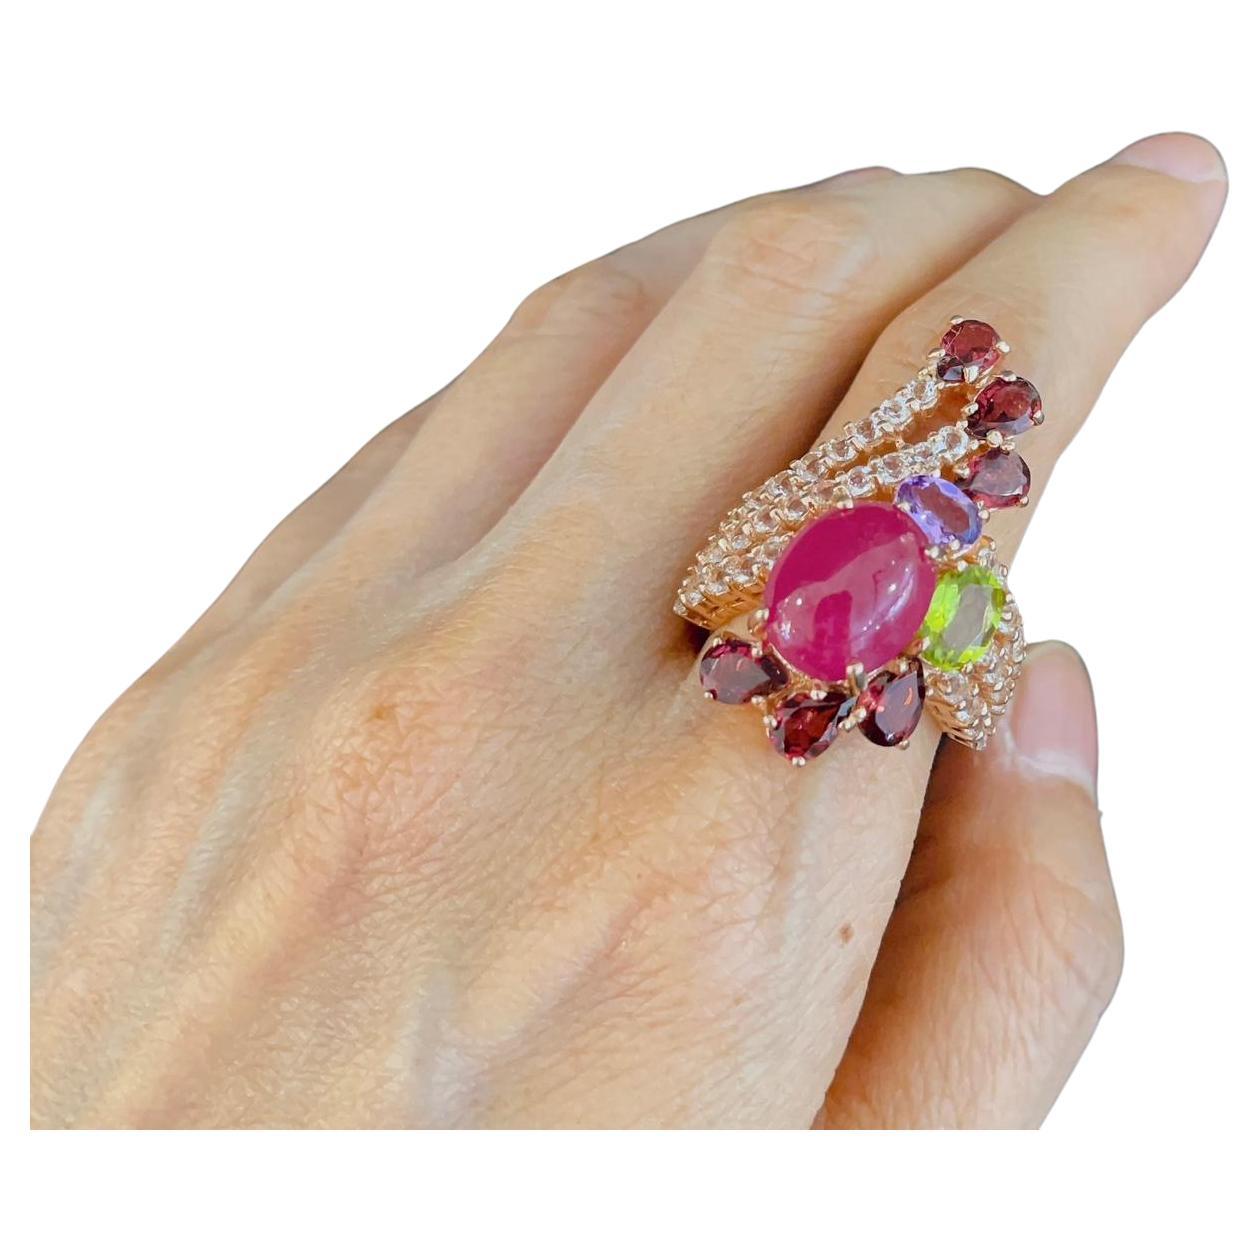 Stunning Bochic “Capri” Ruby & Multi Color Gem Cocktail Ring Set In 22K Gold & Silver 
Multi natural gem Ring 
Beautiful Natural Red Ruby - 7.52 carats
Natural Wine Color Rodorite - 2.37 carats 
Pear brilliant shapes 
Natural Green Oval Shape